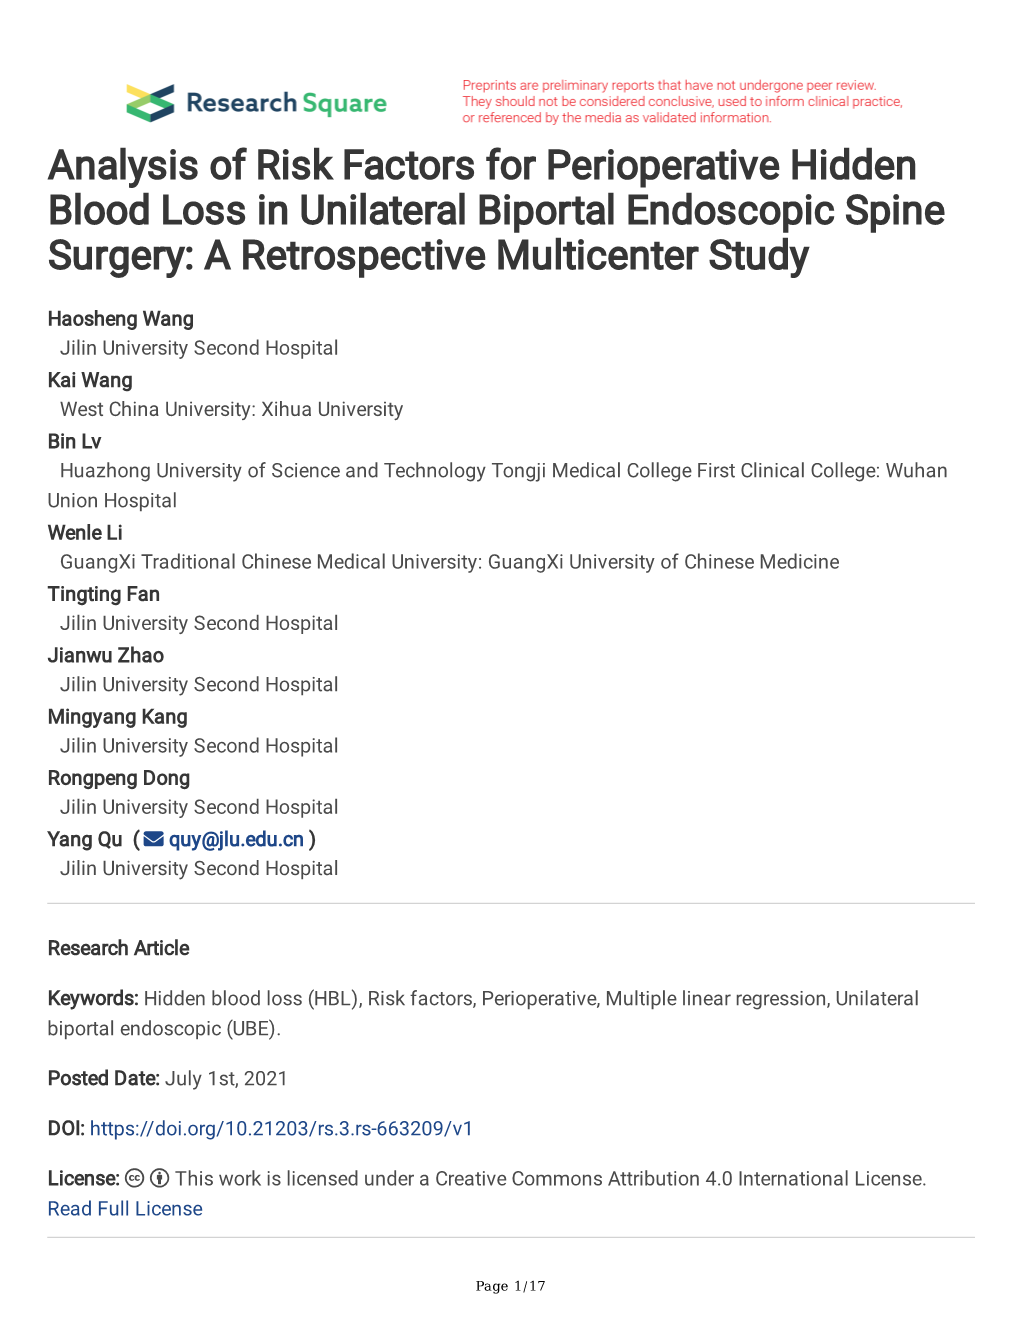 Analysis of Risk Factors for Perioperative Hidden Blood Loss in Unilateral Biportal Endoscopic Spine Surgery: a Retrospective Multicenter Study